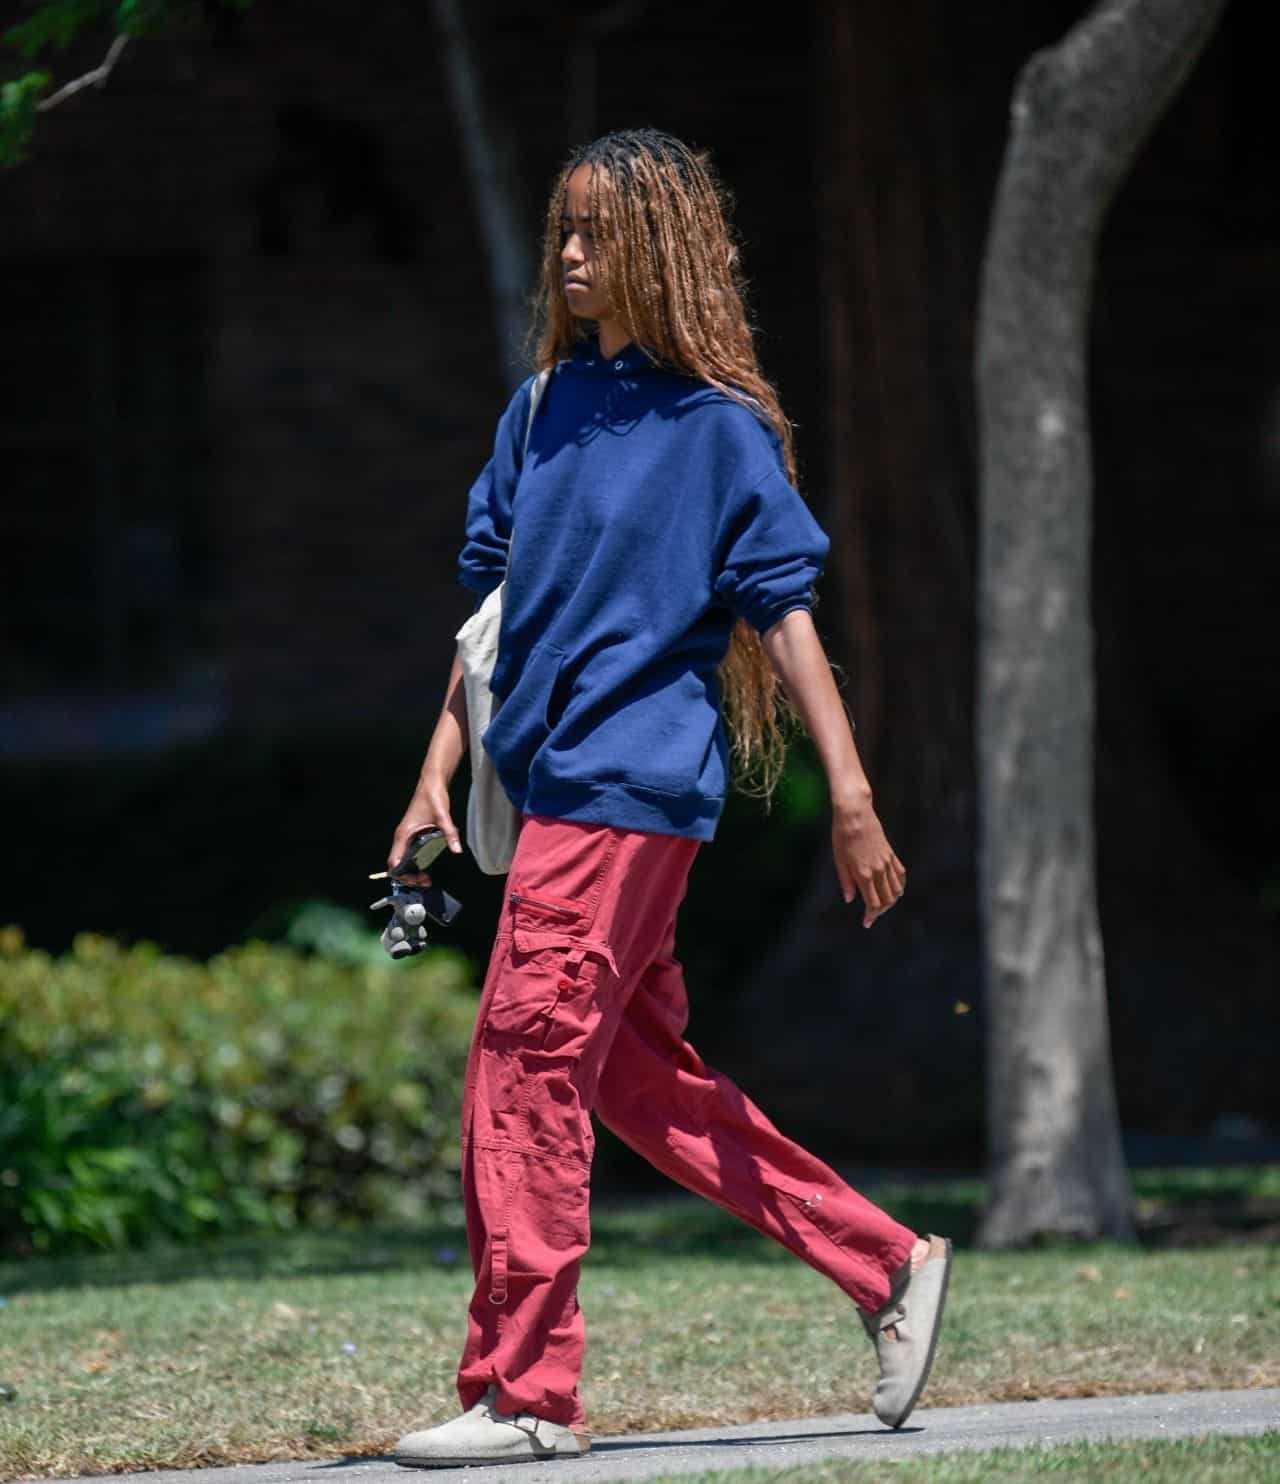 Malia Obama is Seen Casually Strolling Through a Park in Los Angeles